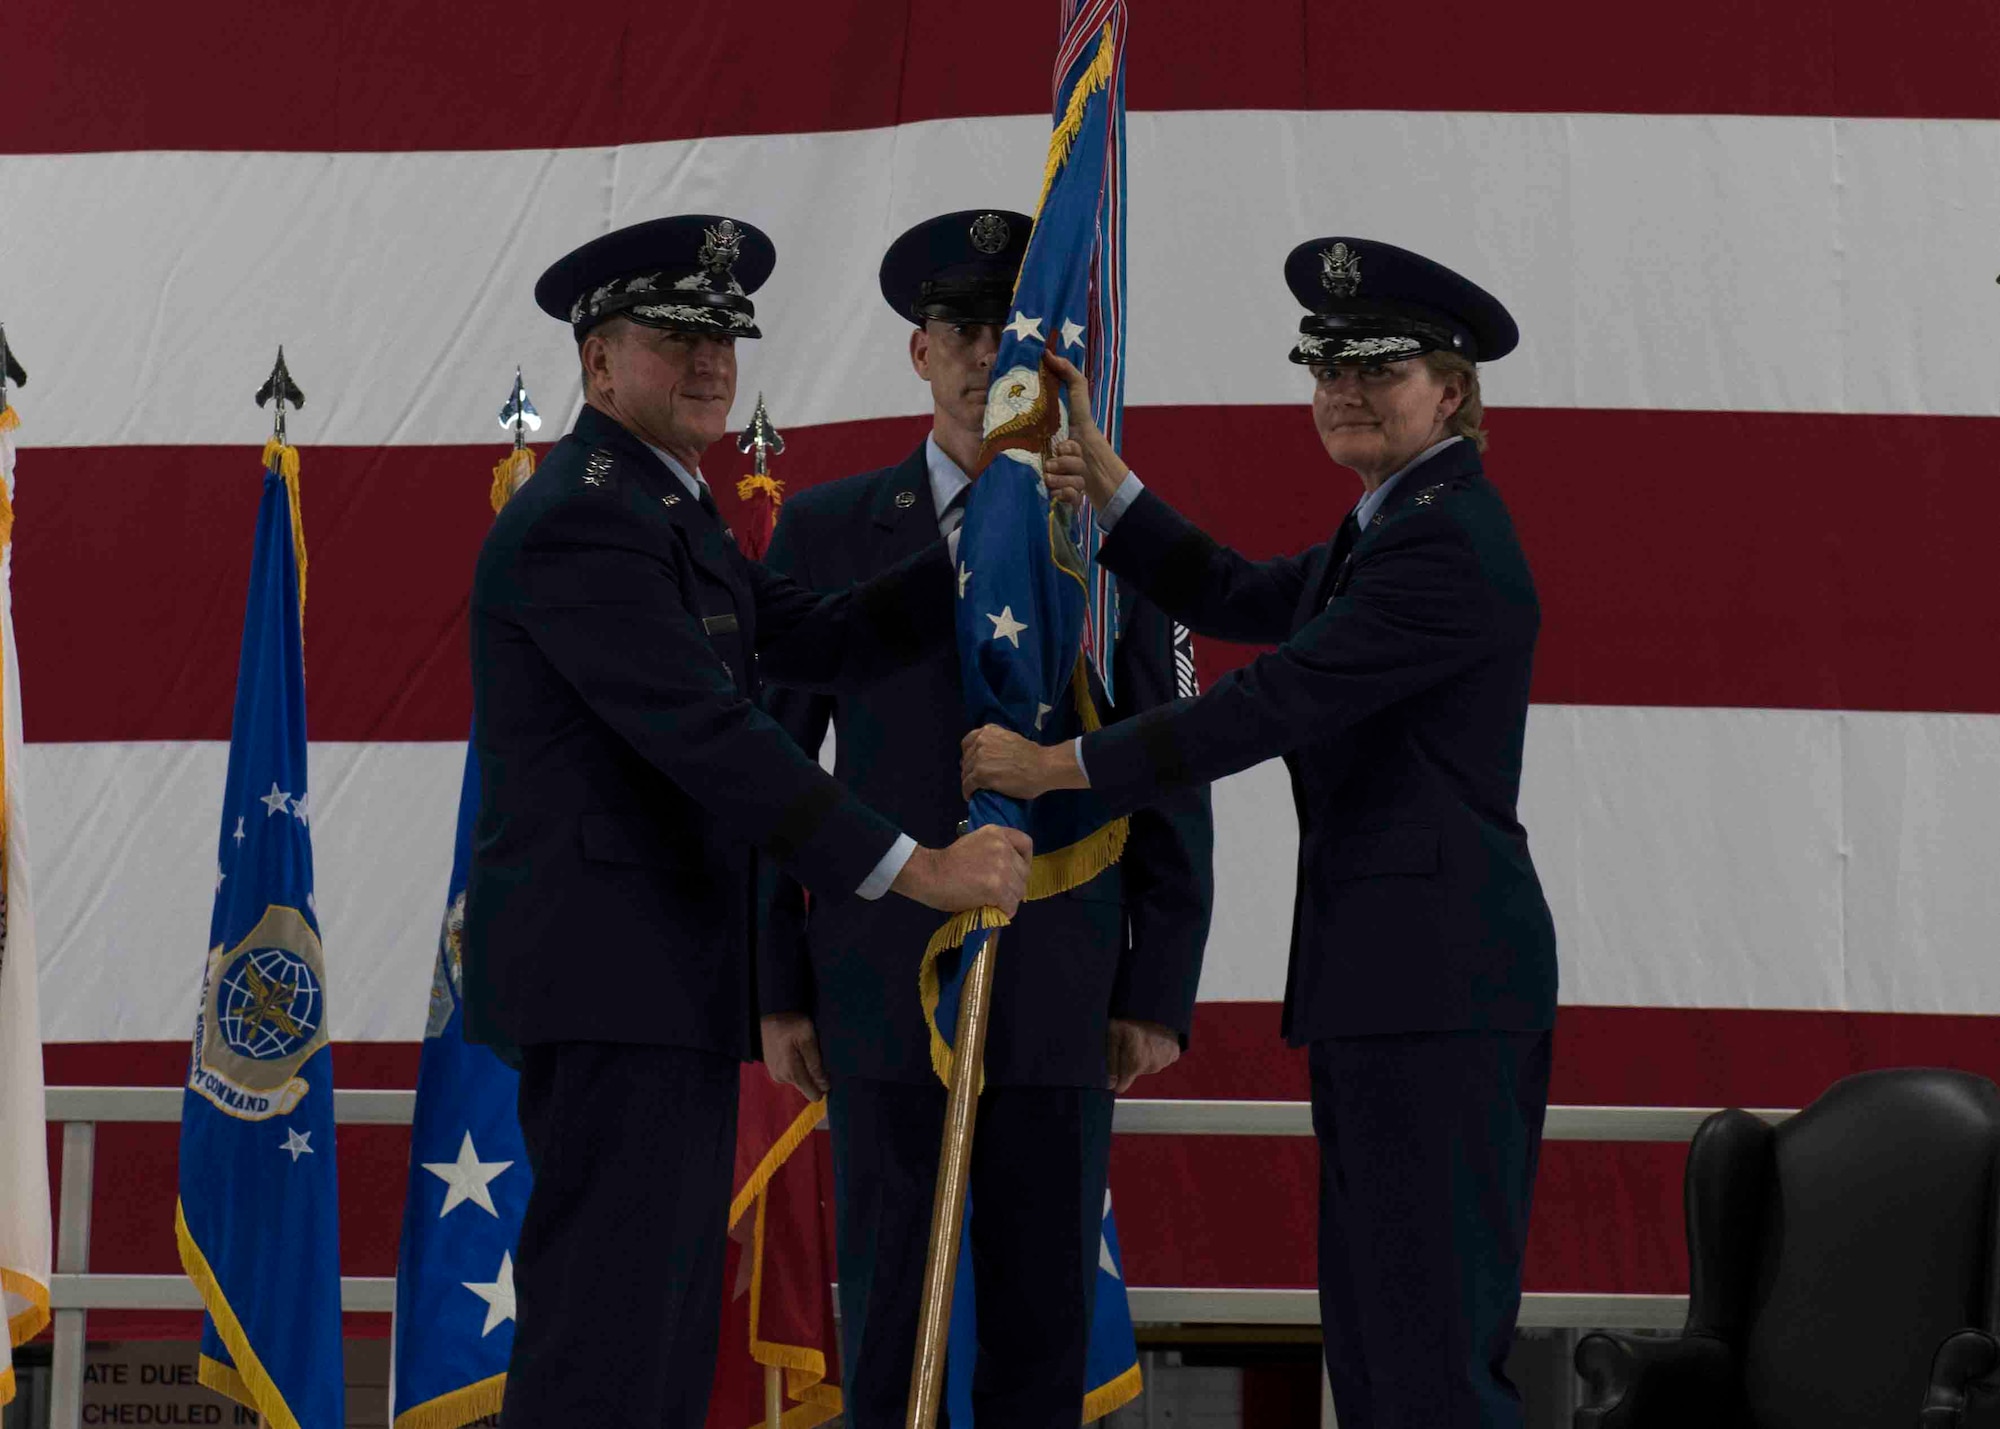 Air Force Chief of Staff Gen. David L. Goldfein passes the Air Mobility Command guidon to Gen. Maryanne Miller, who assumed command of AMC, Scott Air Force Base, Illinois, Sept. 7, 2018. Miller assumed command from Gen. Carlton D. Everhart II, who retires after 35 years of service to the Air Force. AMC provides rapid, global mobility and sustainment for America's armed forces through airlift, aerial refueling, aeromedical evacuation and mobility support. (U.S. Air Force photo by Tech. Sgt. Jodi Martinez)